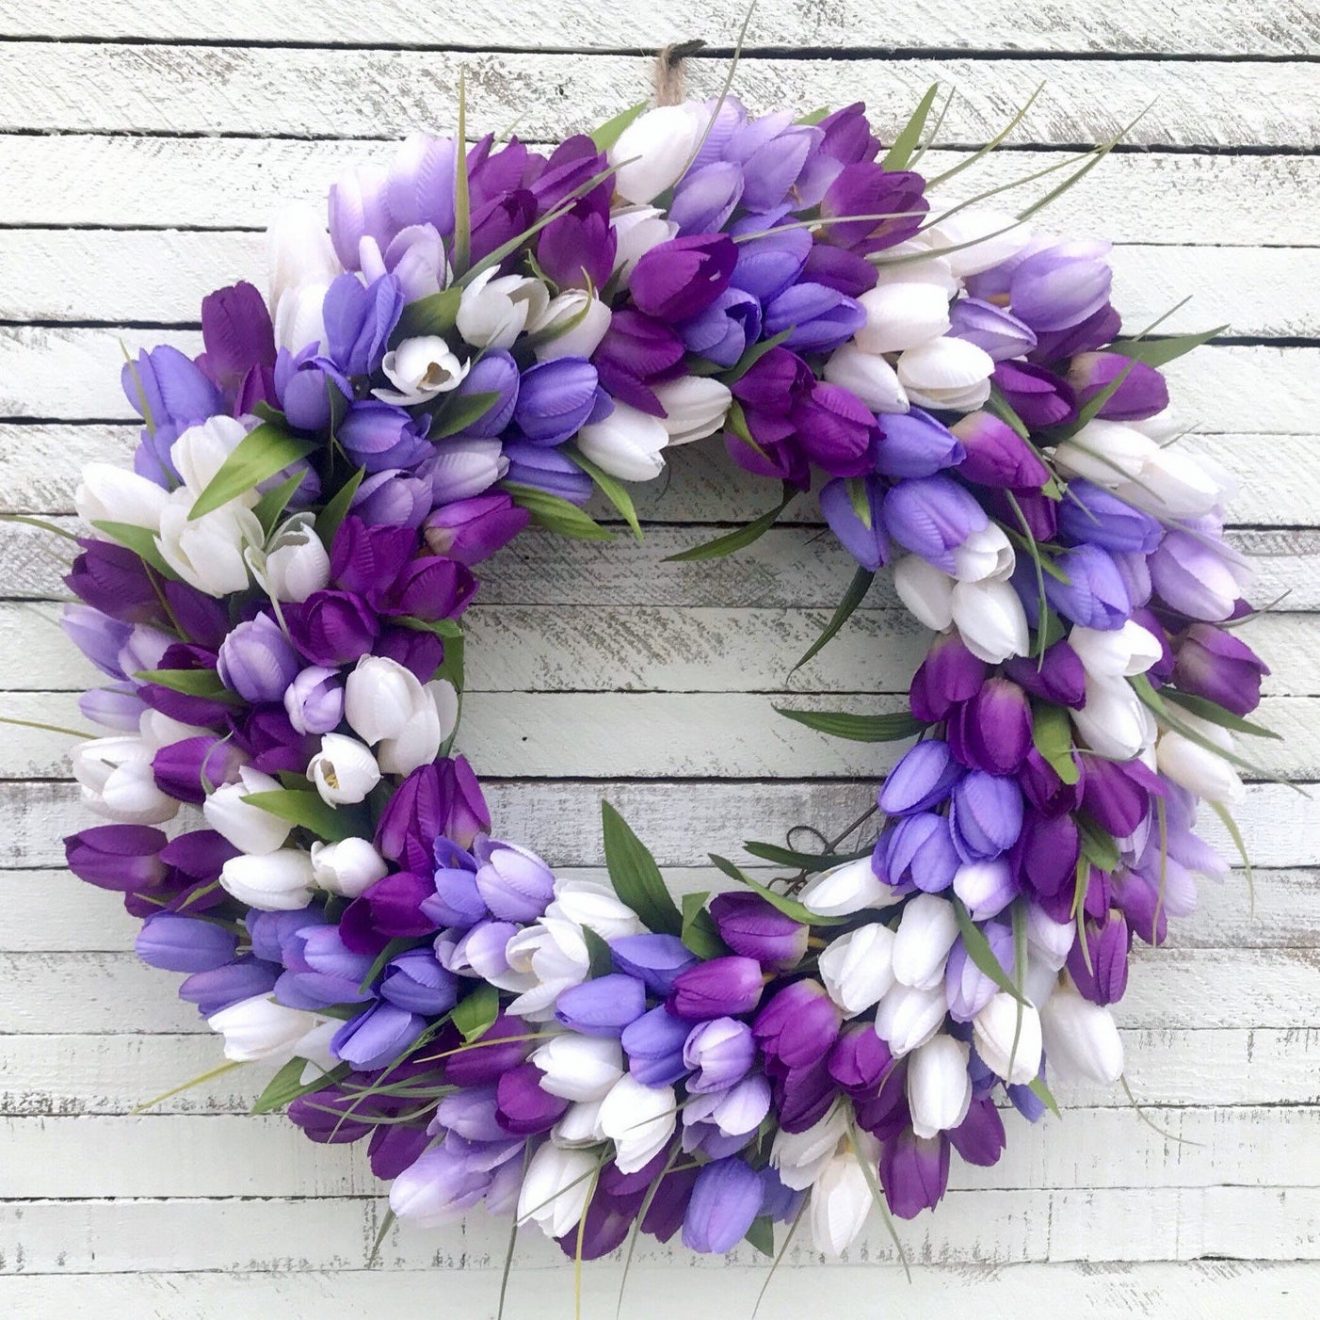 TRRAPLE Artificial Lavender Wreath 24 Inch Spring Wreath for Front Door Green Leaves Lavender Door Wreath for Farmhouse Wall Home Decoration